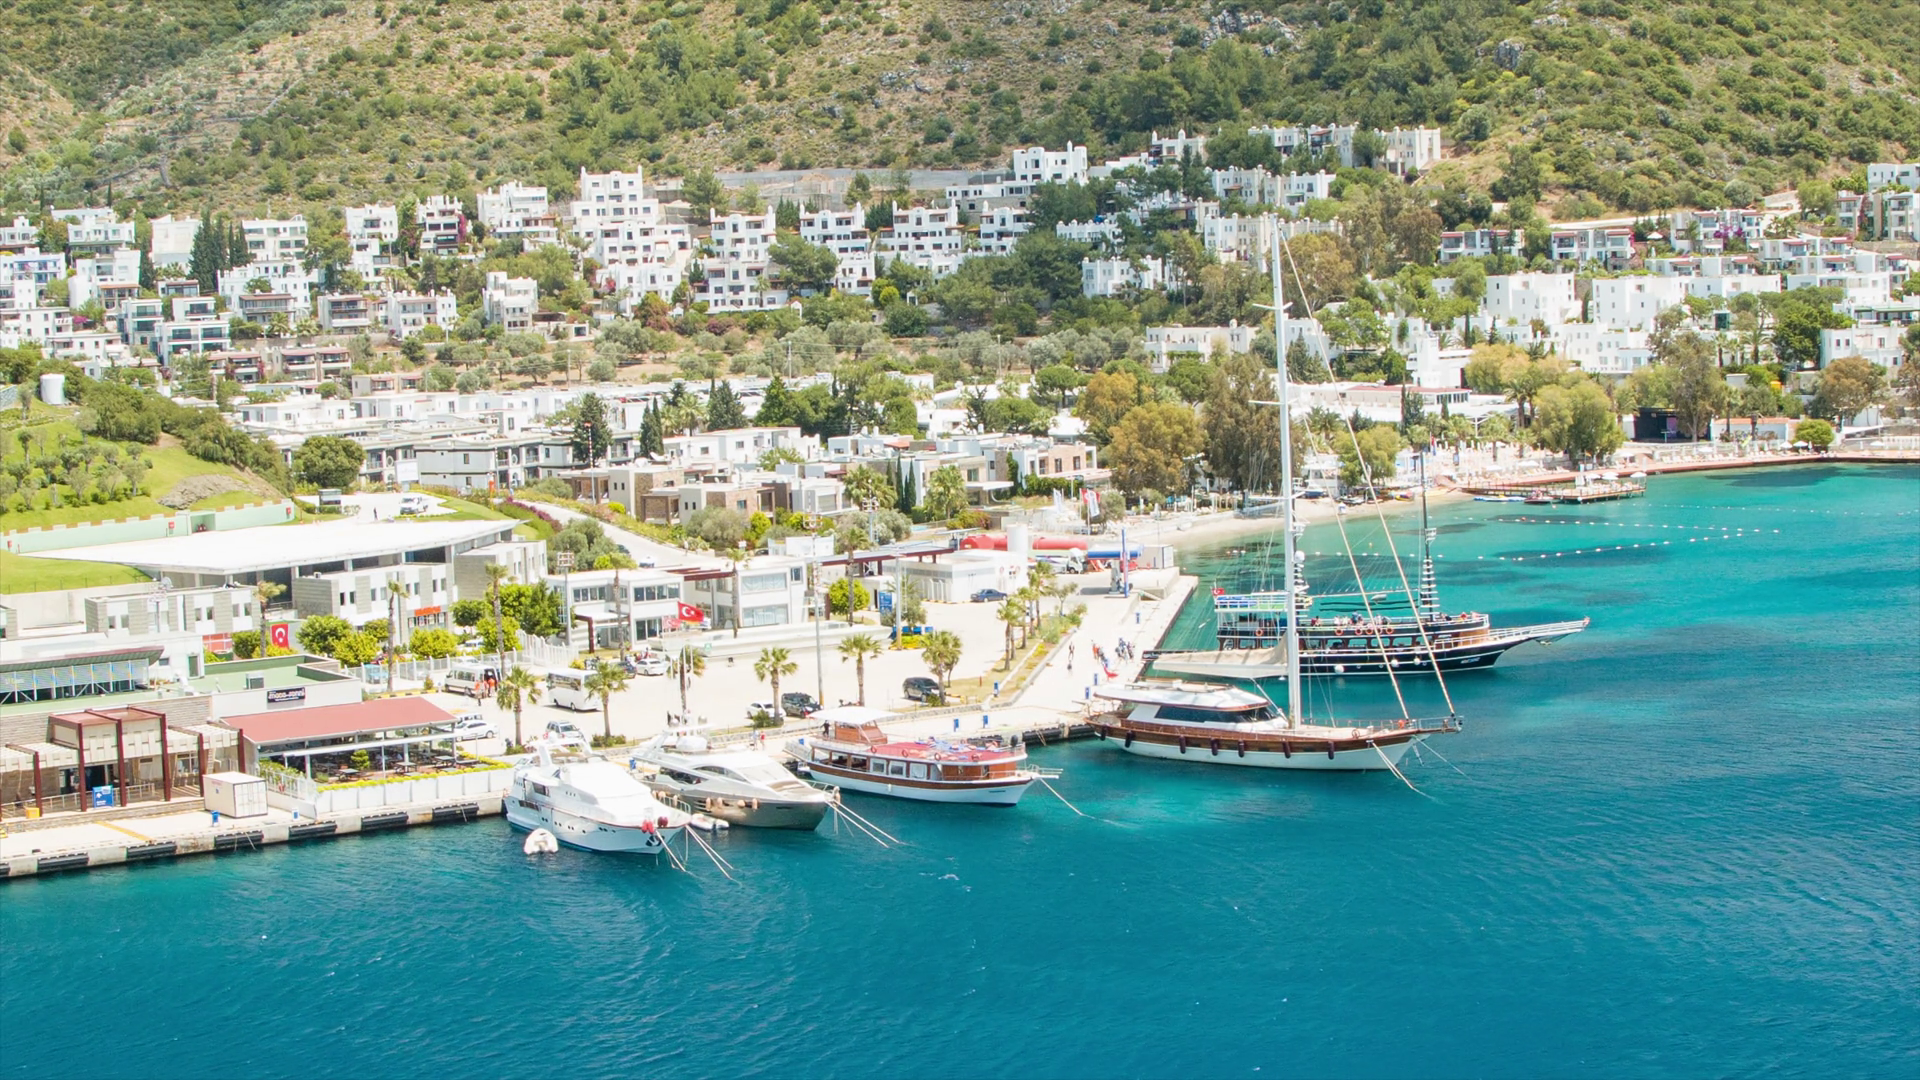 Bodrum Turkey Cruise Port with Sailboats and Yachts Anchored in Blue ...